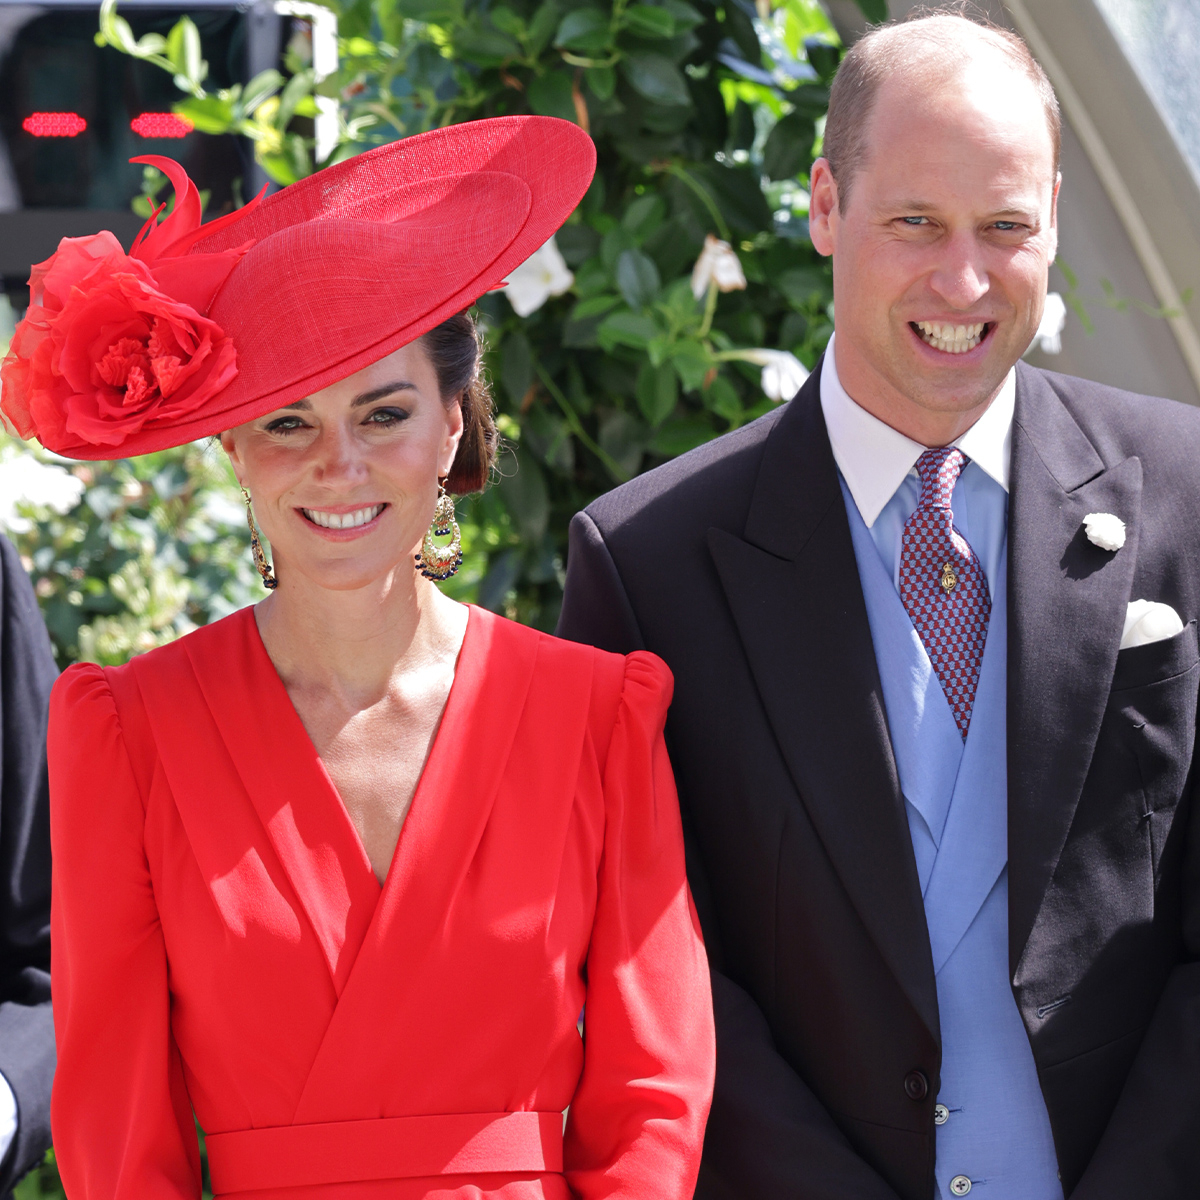 Kate Middleton Channels 'Pretty Woman' Style in Polka Dot Dress & Brown  Heels at the Royal Ascot